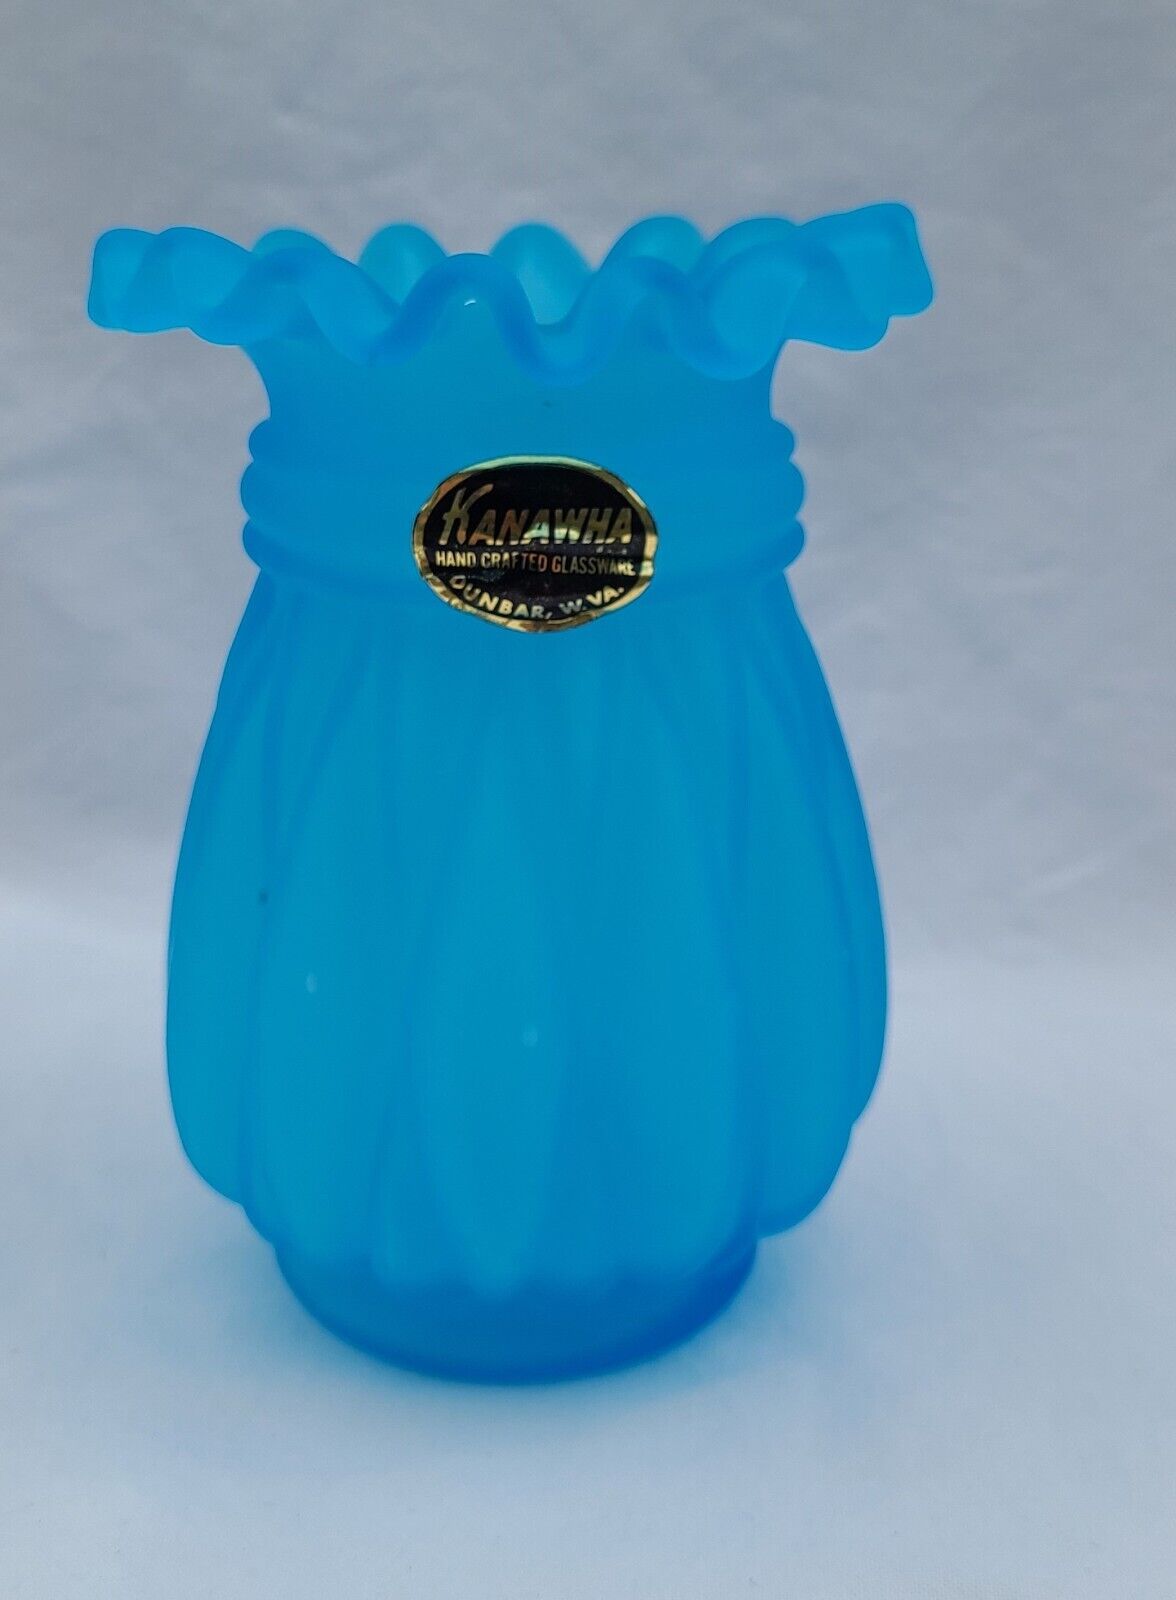 Vintage Kanawha Blue Satin Glass Ruffled Vase  Hand crafted    SEE VIDEO